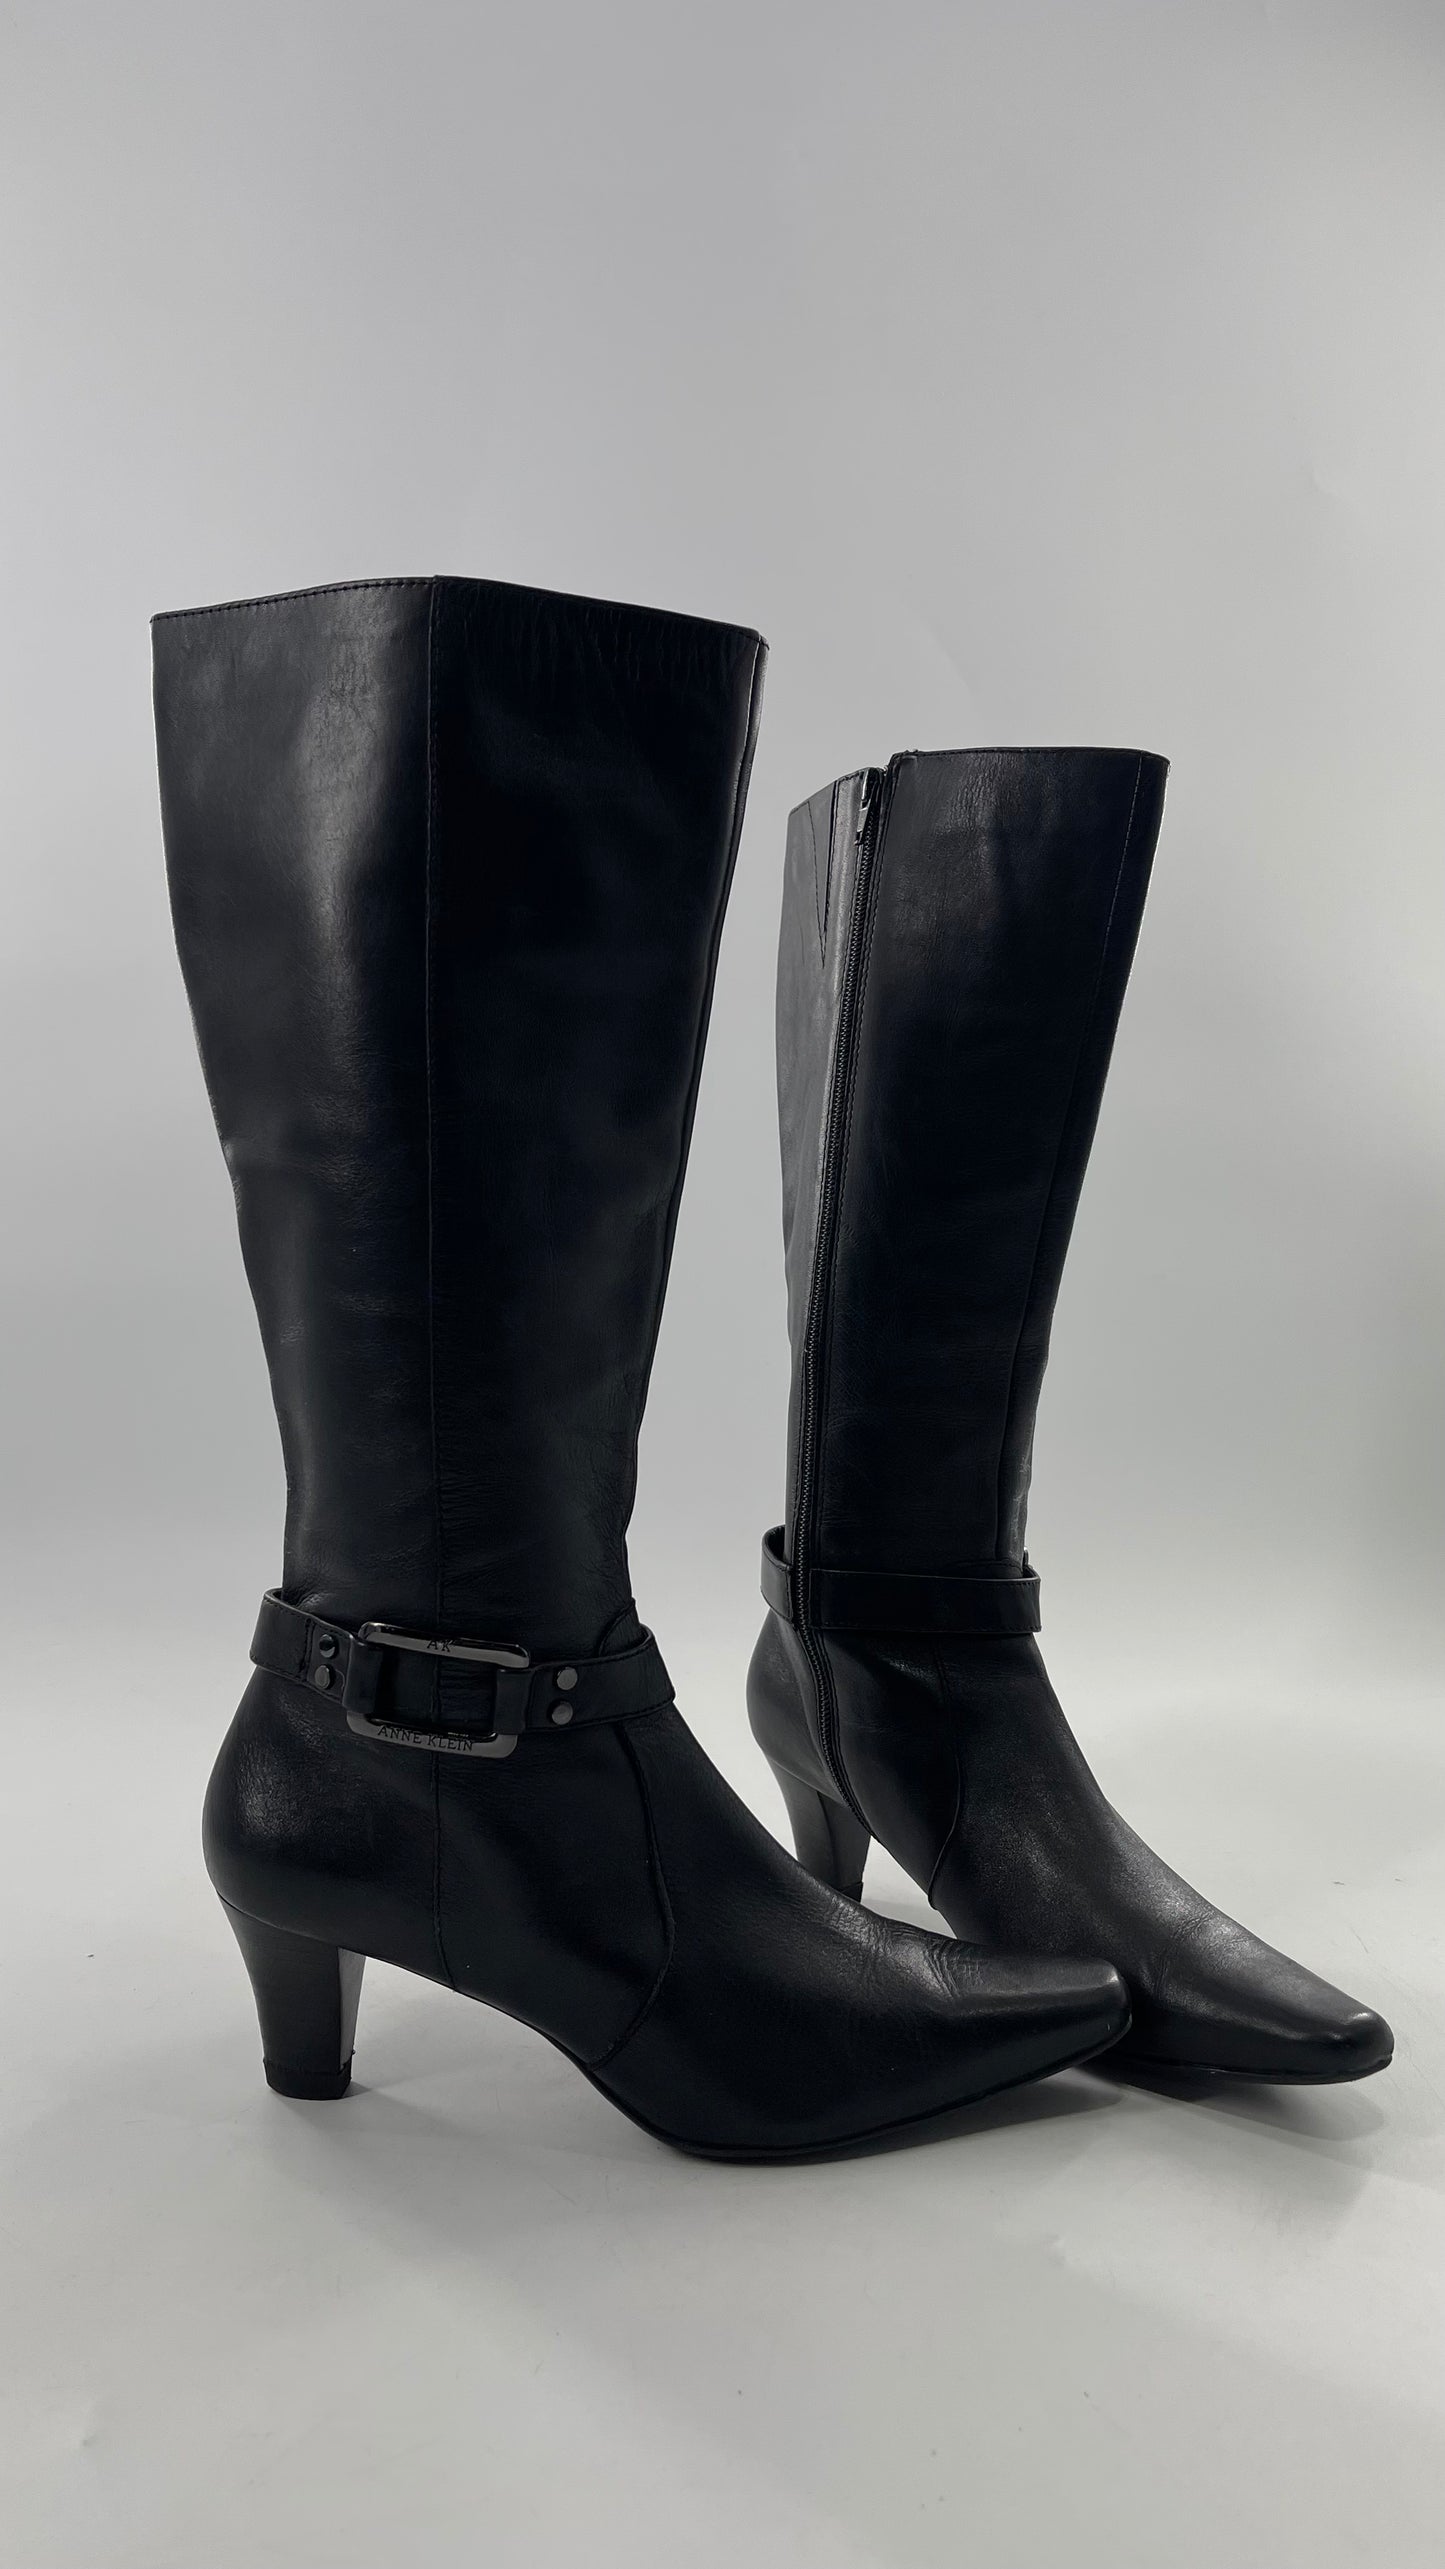 Vintage Black Anne Klein Leather Knee High Boots with Pointed Toe and Ankle Metal Buckle Detail (8)